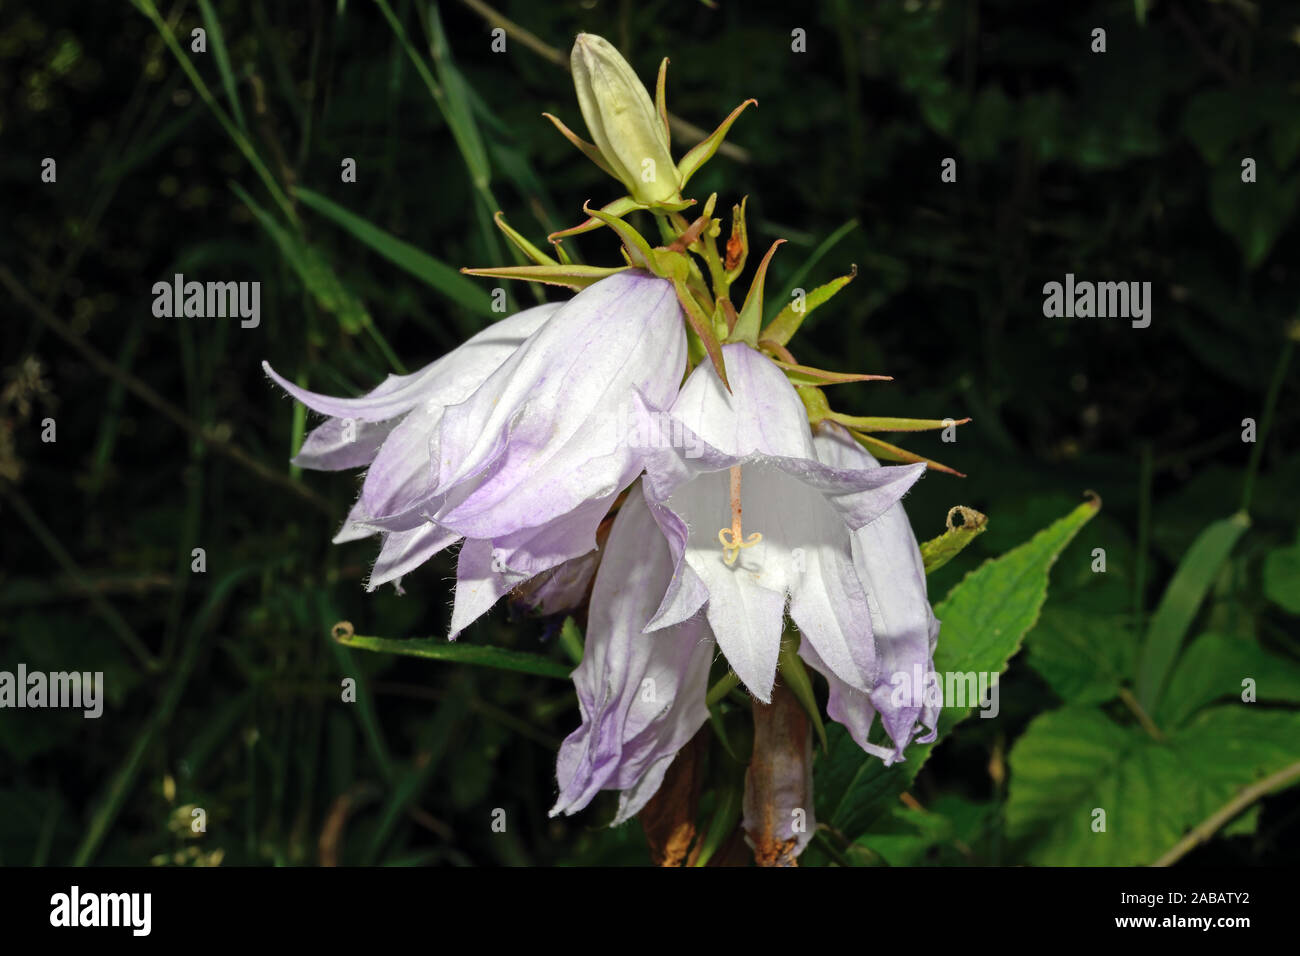 Campanula latifolia (giant bellflower) is native to Europe and western Asia where it occurs in broad-leaved woodland and forest margins. Stock Photo